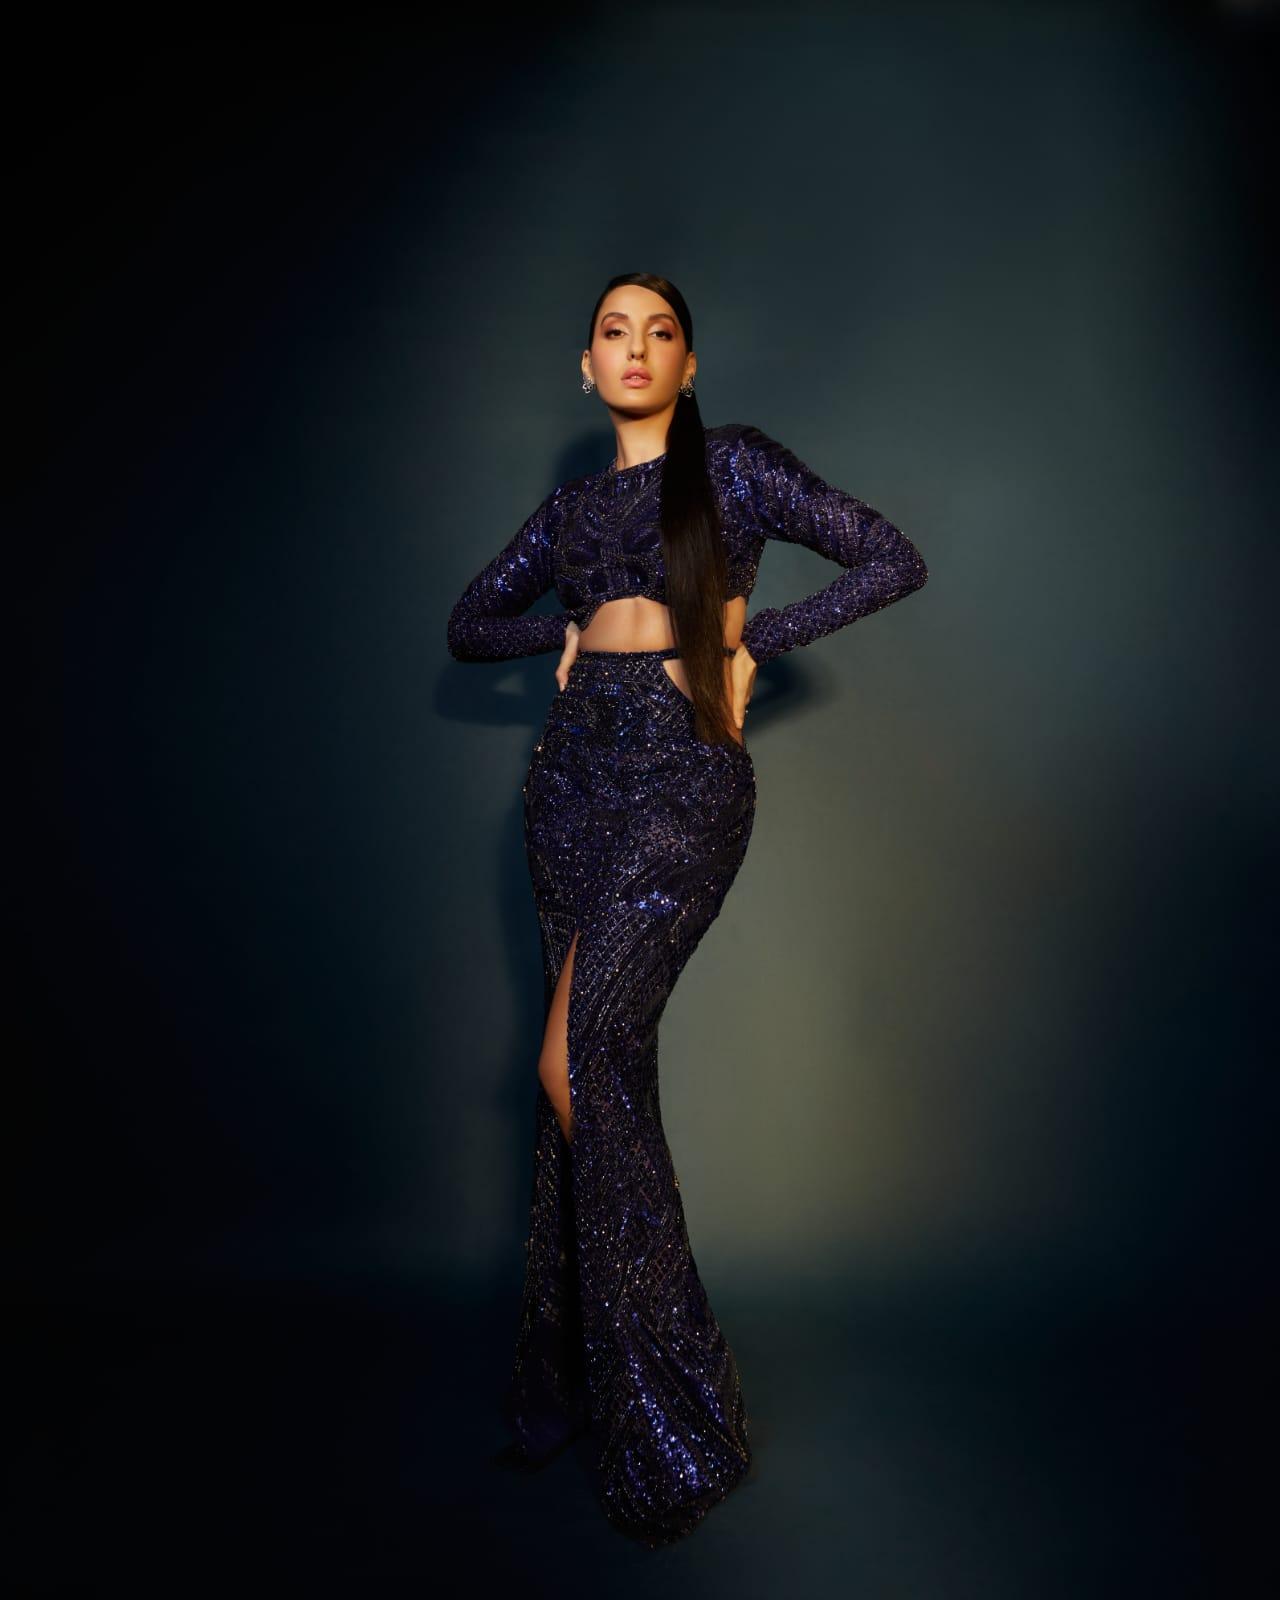 In a couture Falguni and Shane Peacock ensemble, Nora amazed everyone with this statuesque gown. Embellishments, that deep shade of violent, the slick pony hairstyle and golden-hued make-up, made for the perfect look